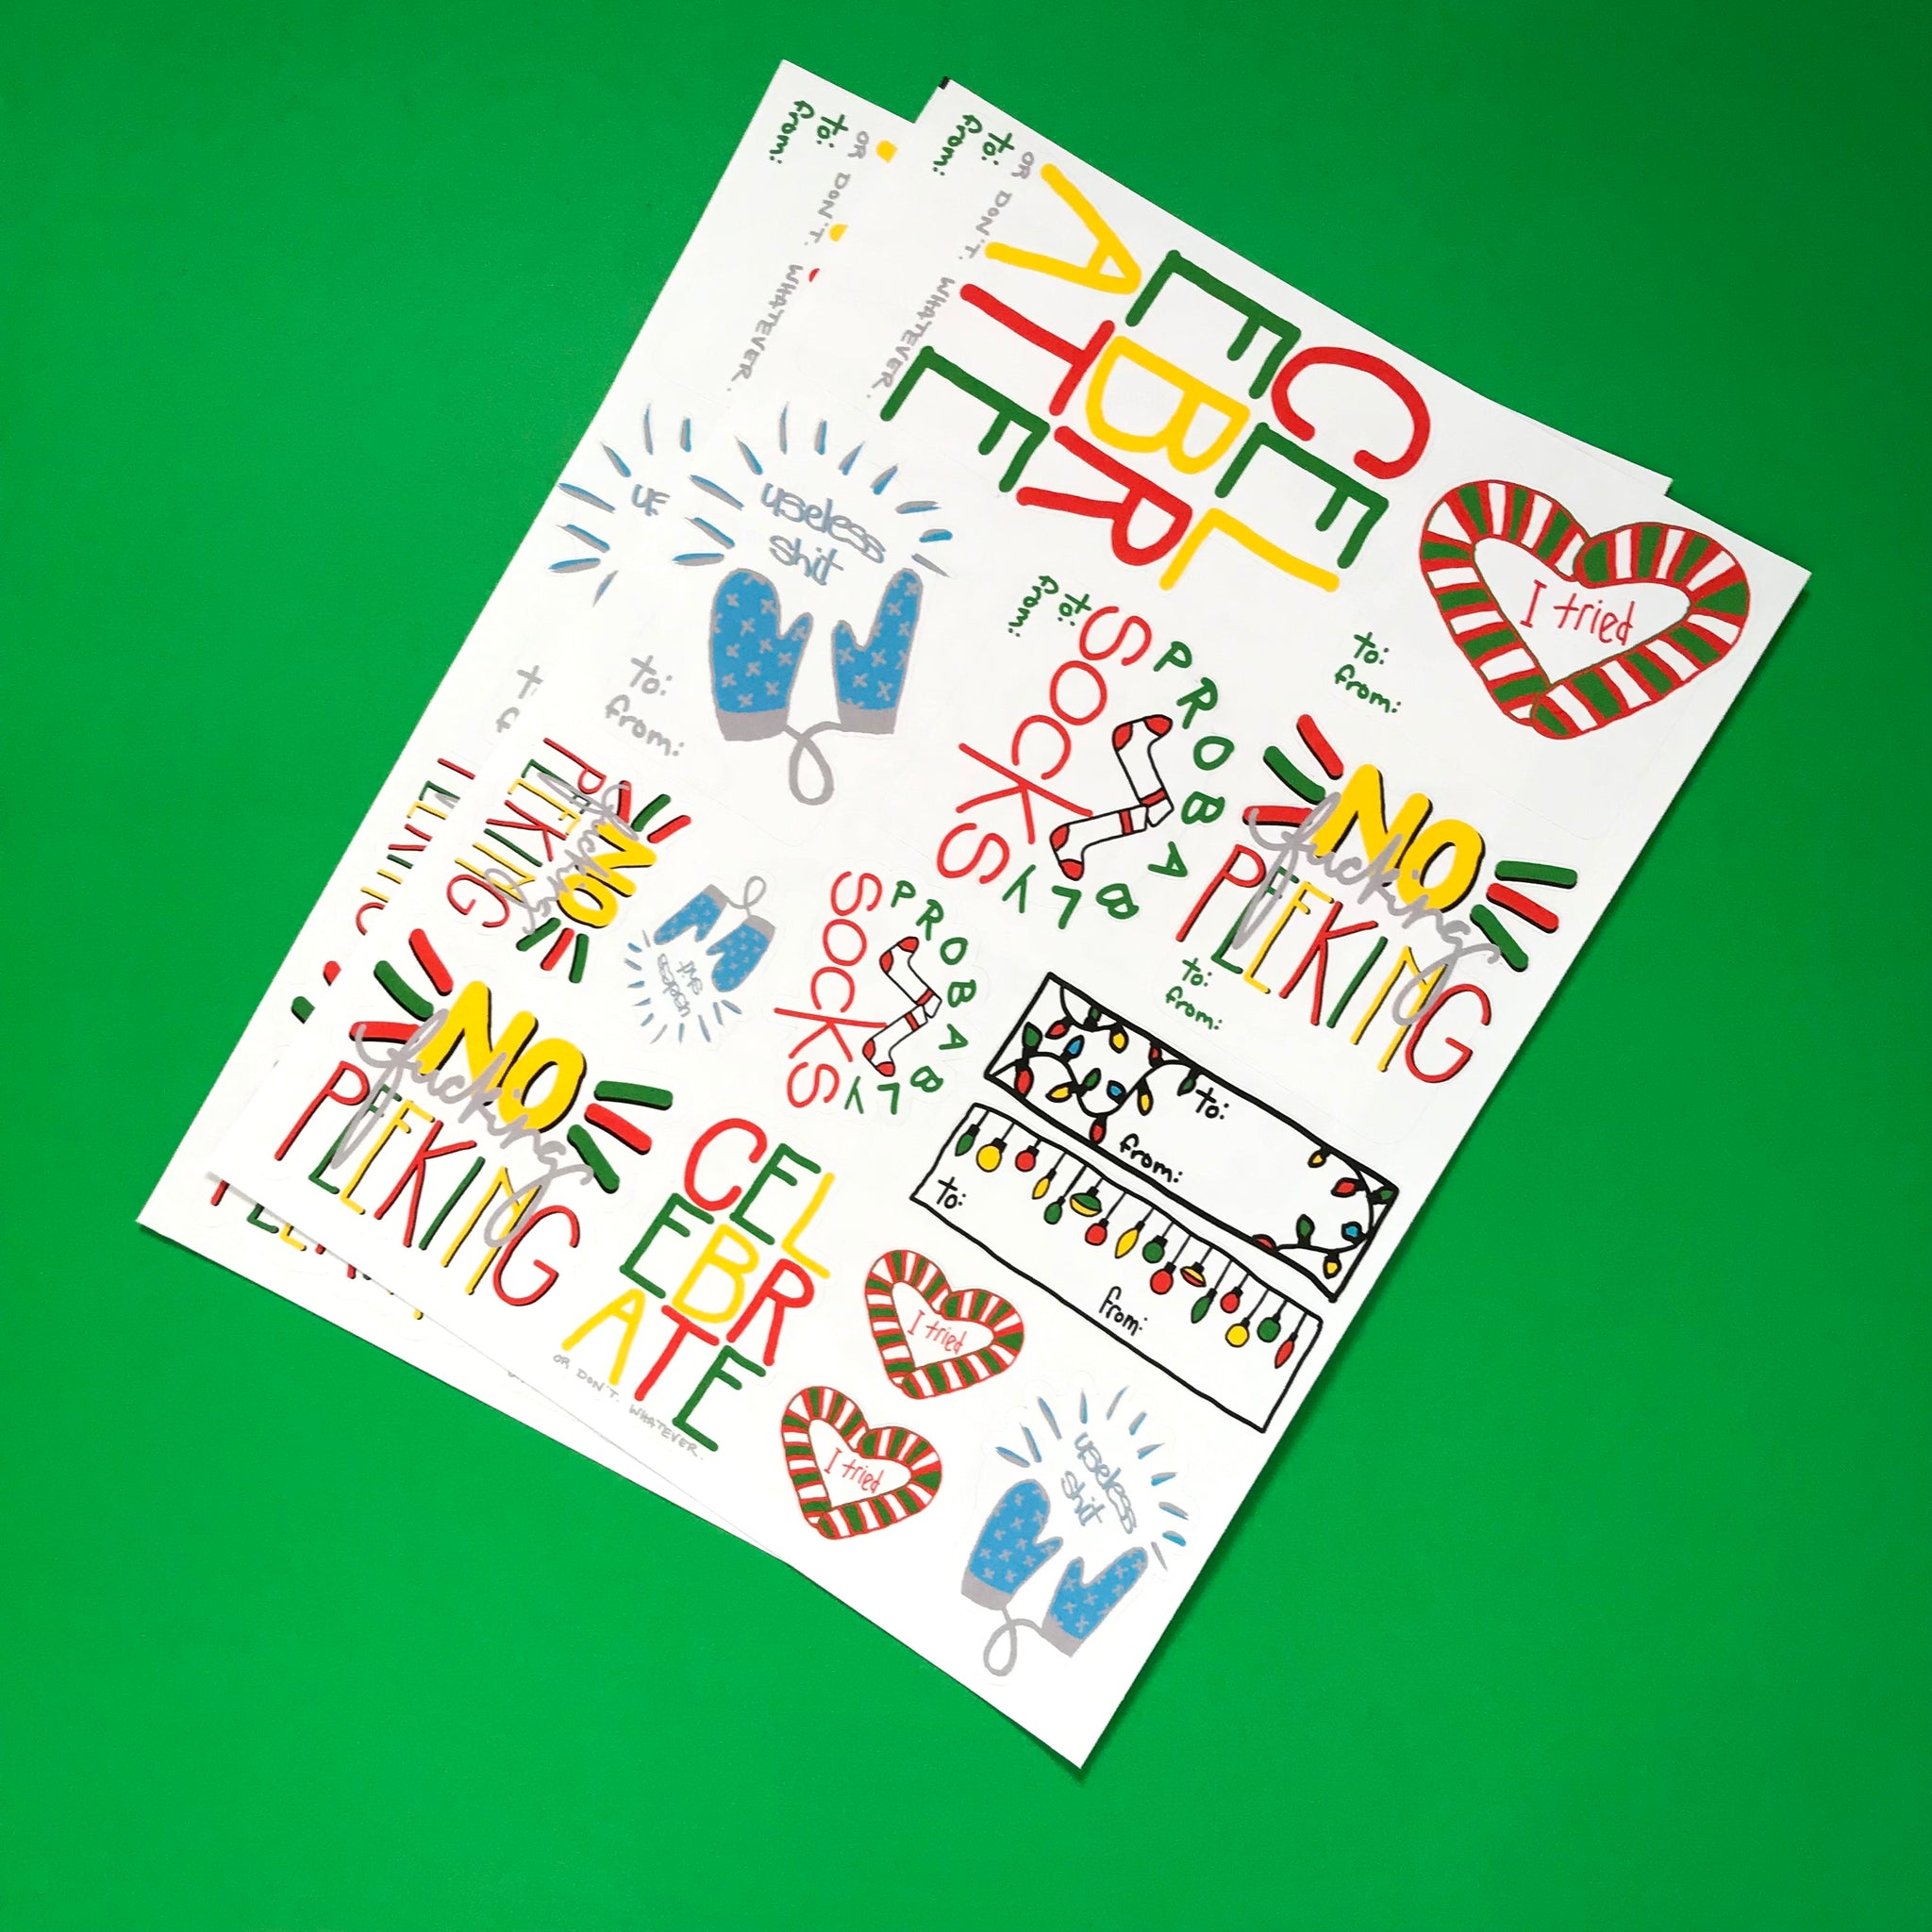 two sheets of holiday gift tag stickers are shown against a cheery green background.  The tags of funny adult humor sayings like no fucking peeking and useless shit